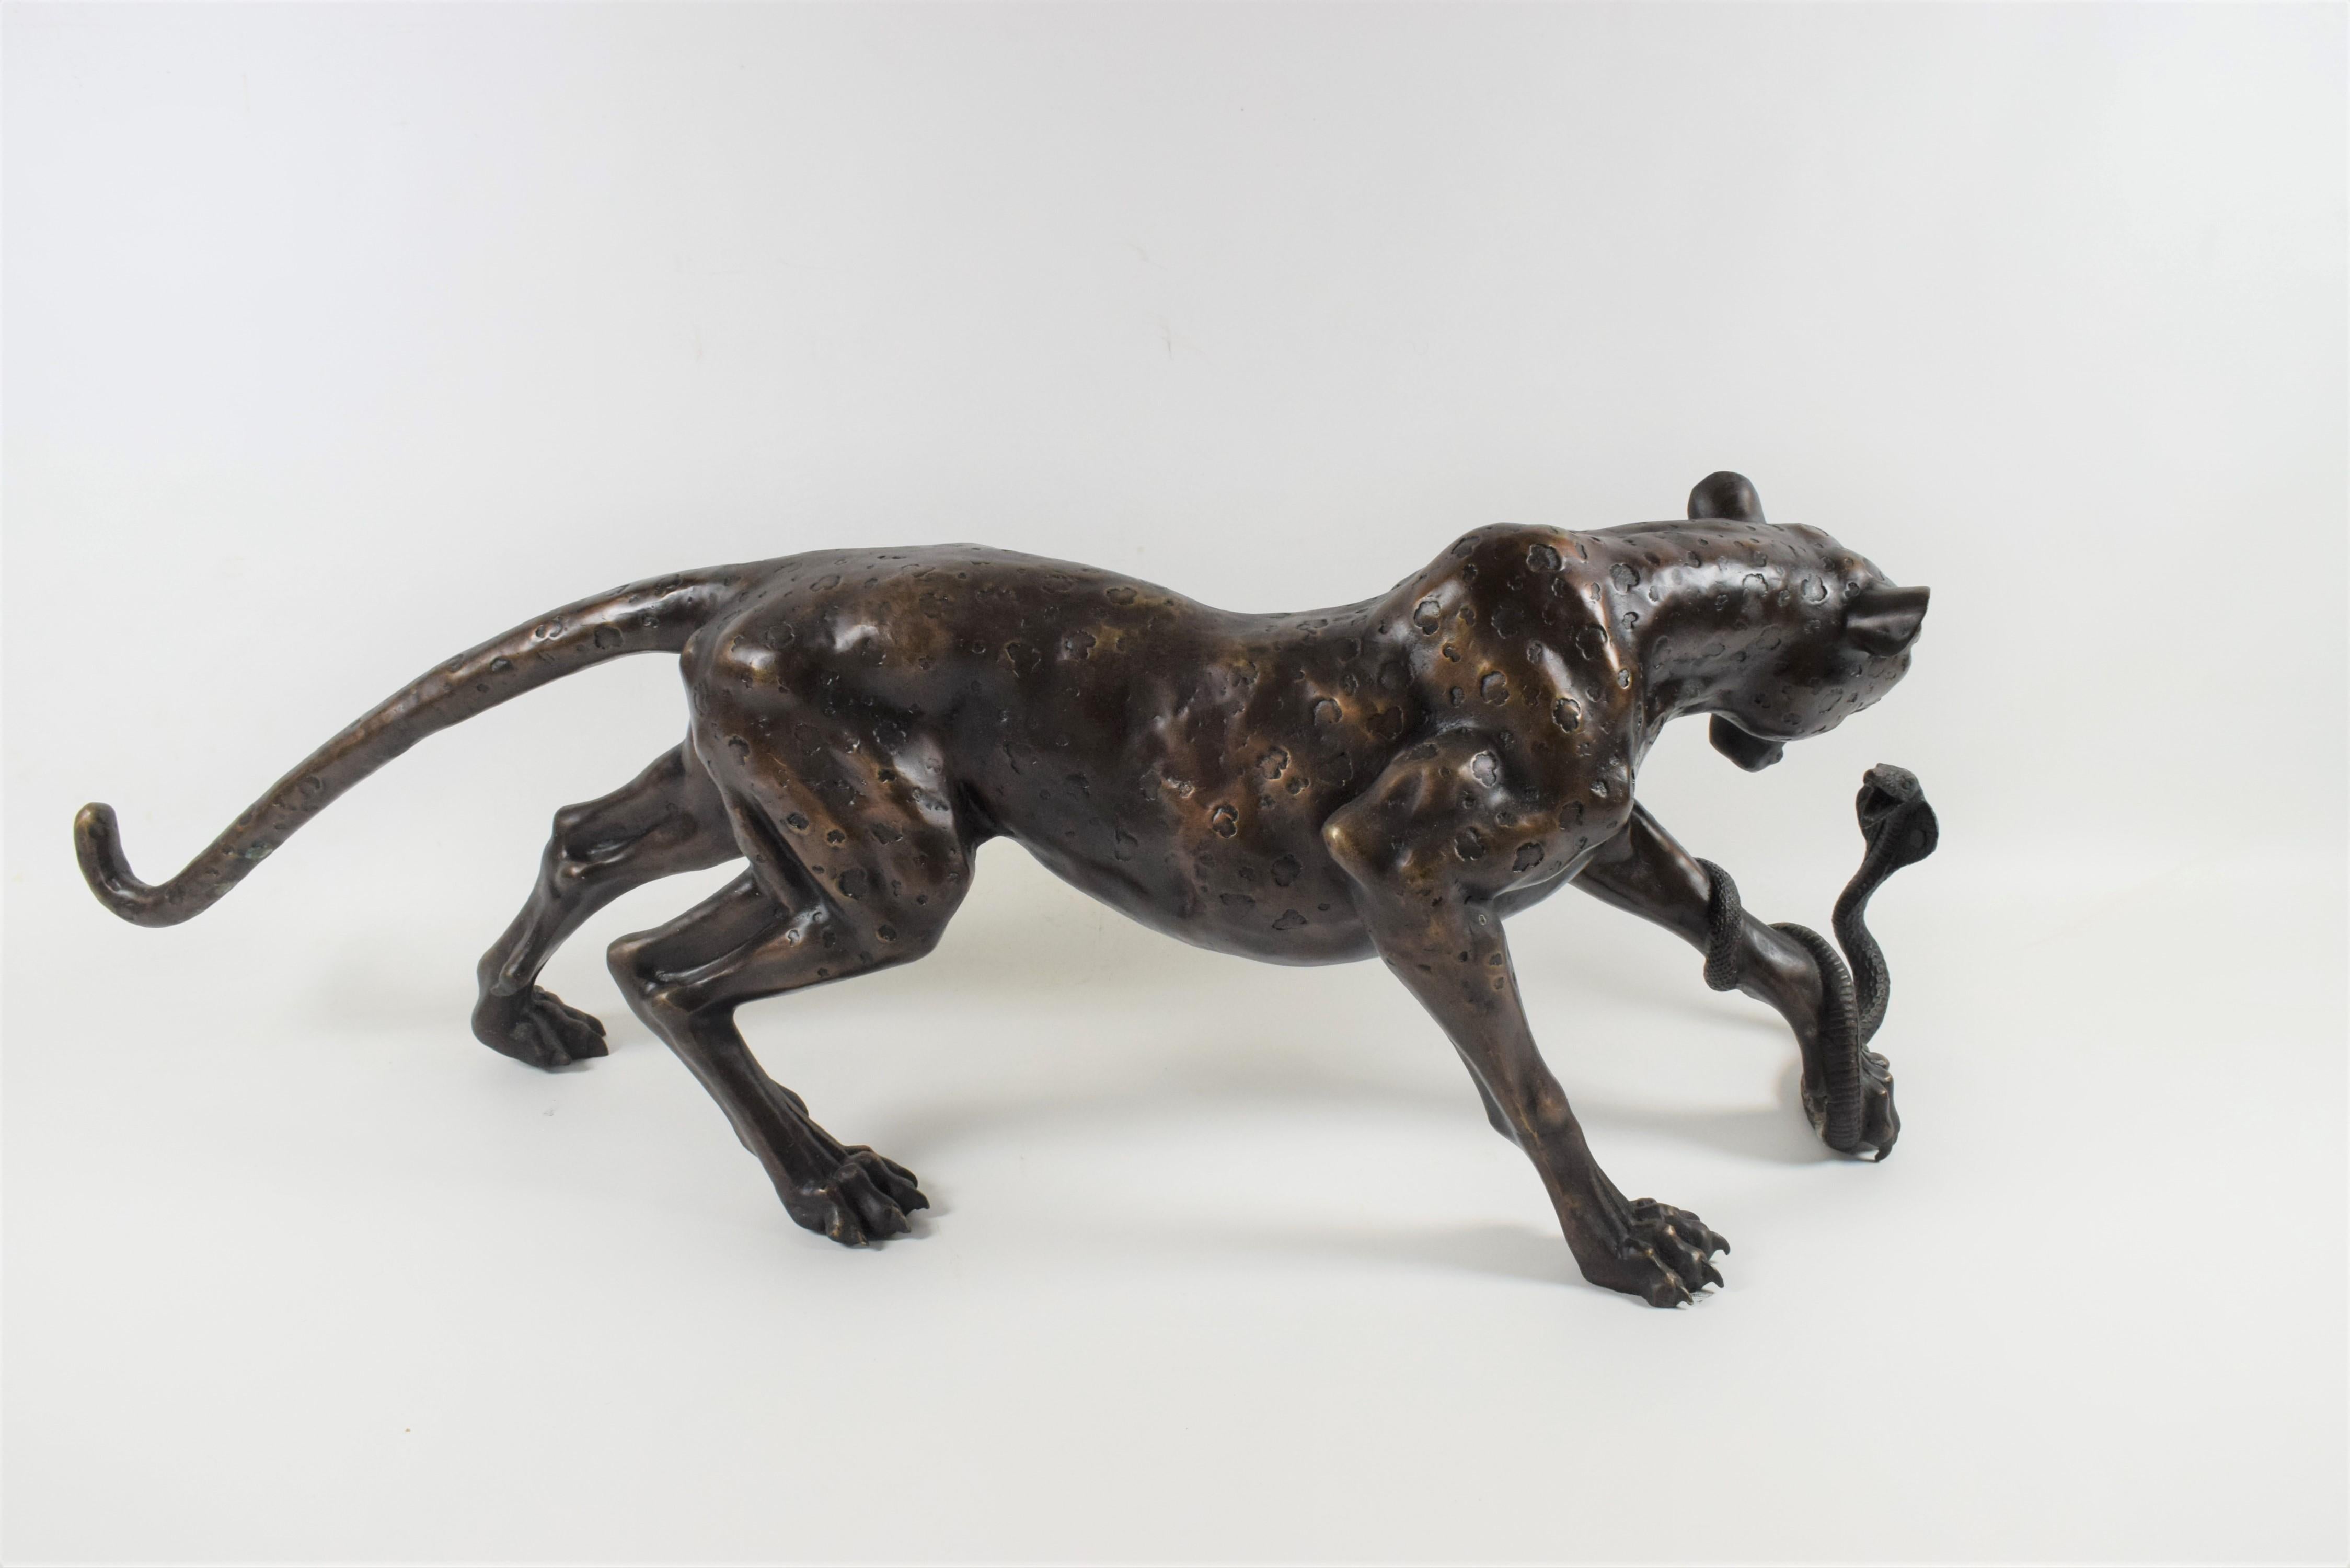 The bronze leopard pouncing on a cobra is an exquisite art deco sculpture that captures the intense and dramatic moment of a predator hunting its prey. Crafted with meticulous detail and a keen sense of motion, this sculpture brings to life the raw